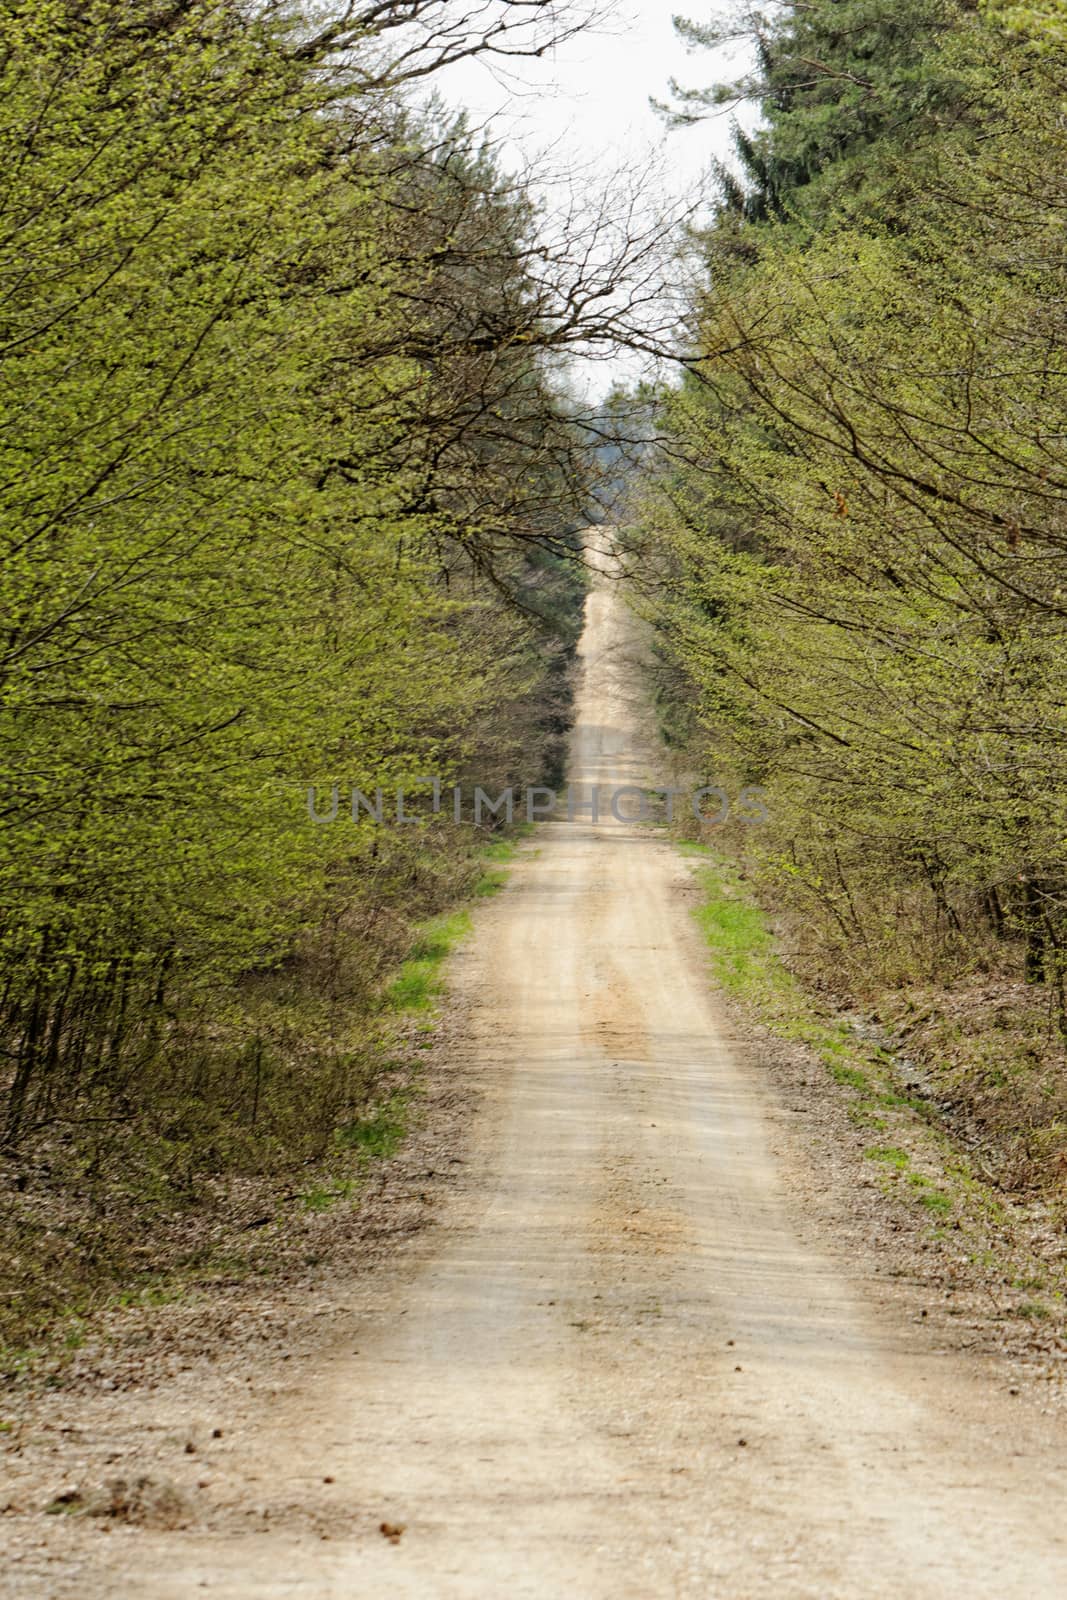 dirt road in the forest